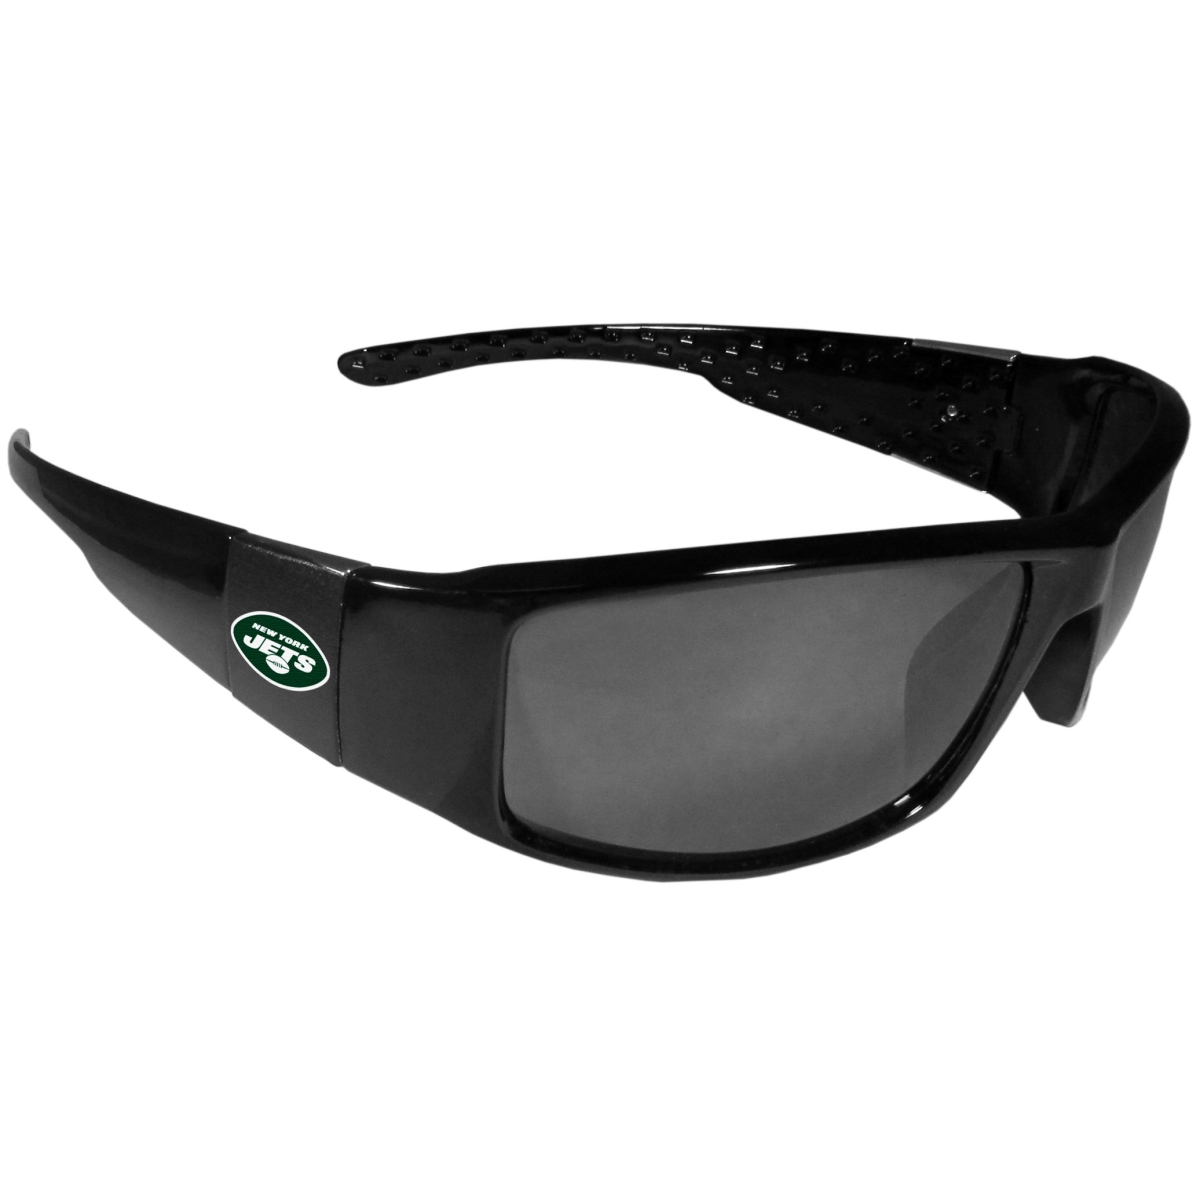 Picture of Siskiyou 2FCB100 Unisex NFL New York Jets Black Wrap Sunglasses - One Size